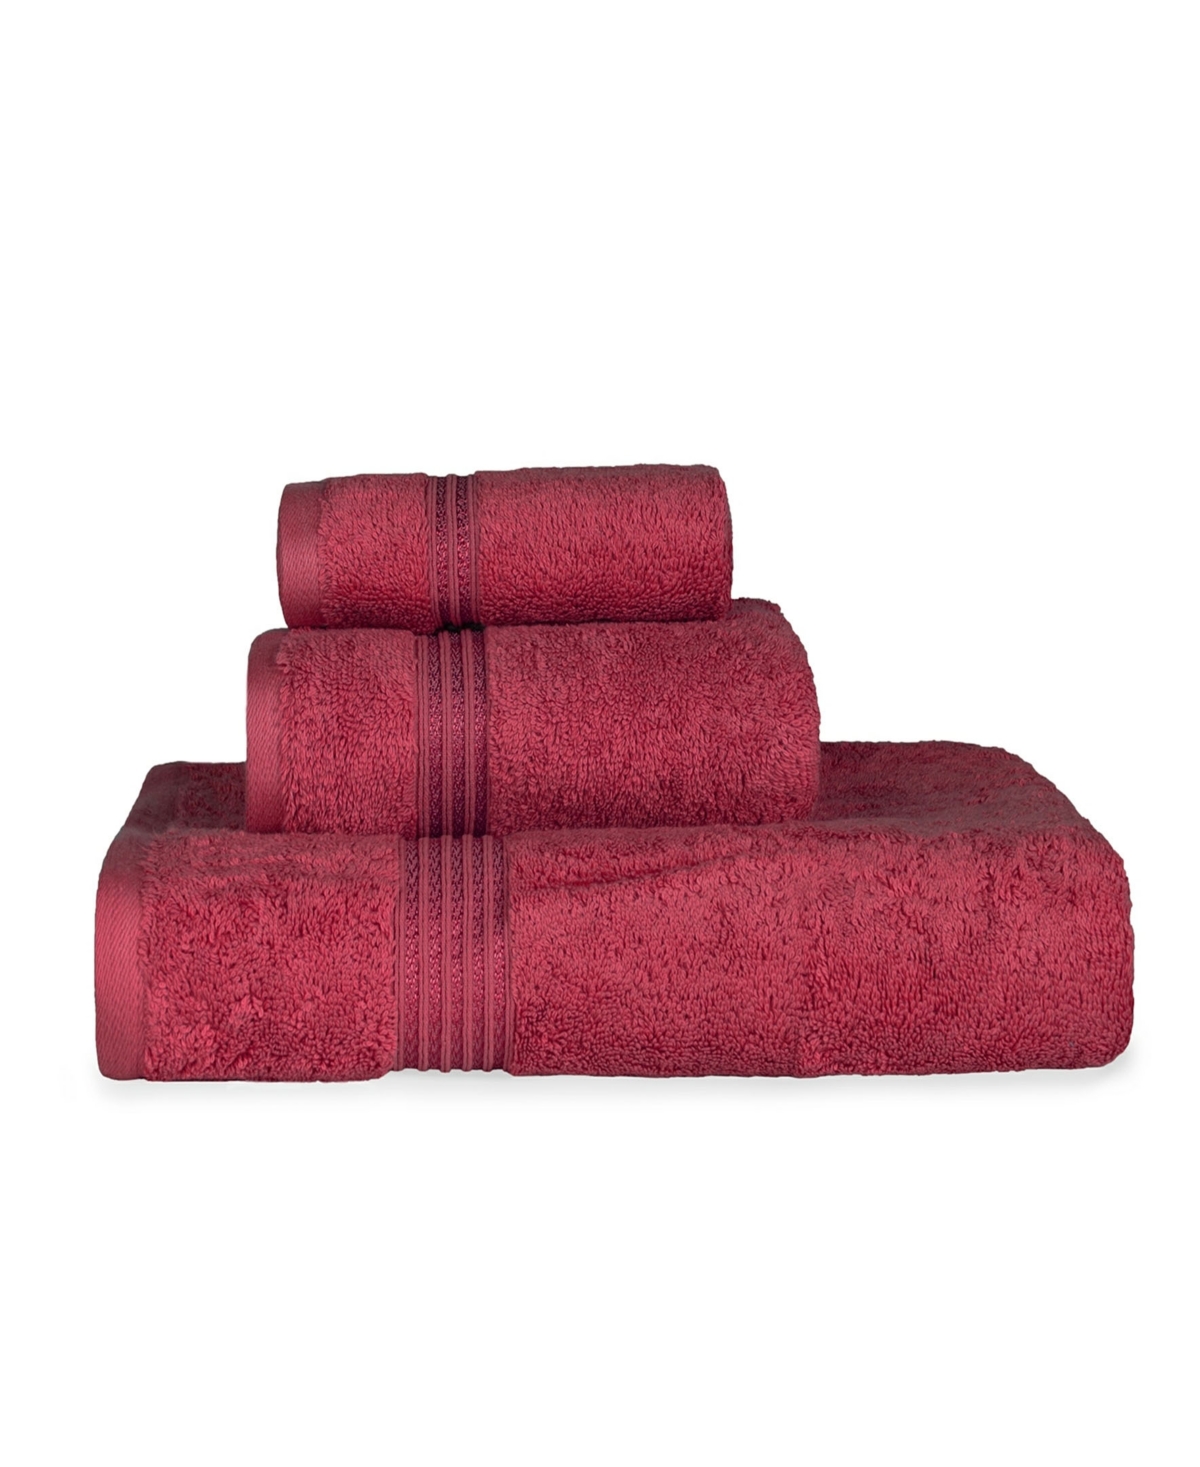 Superior Solid Quick Drying Absorbent 3 Piece Egyptian Cotton Assorted Towel Set Bedding In Burgundy